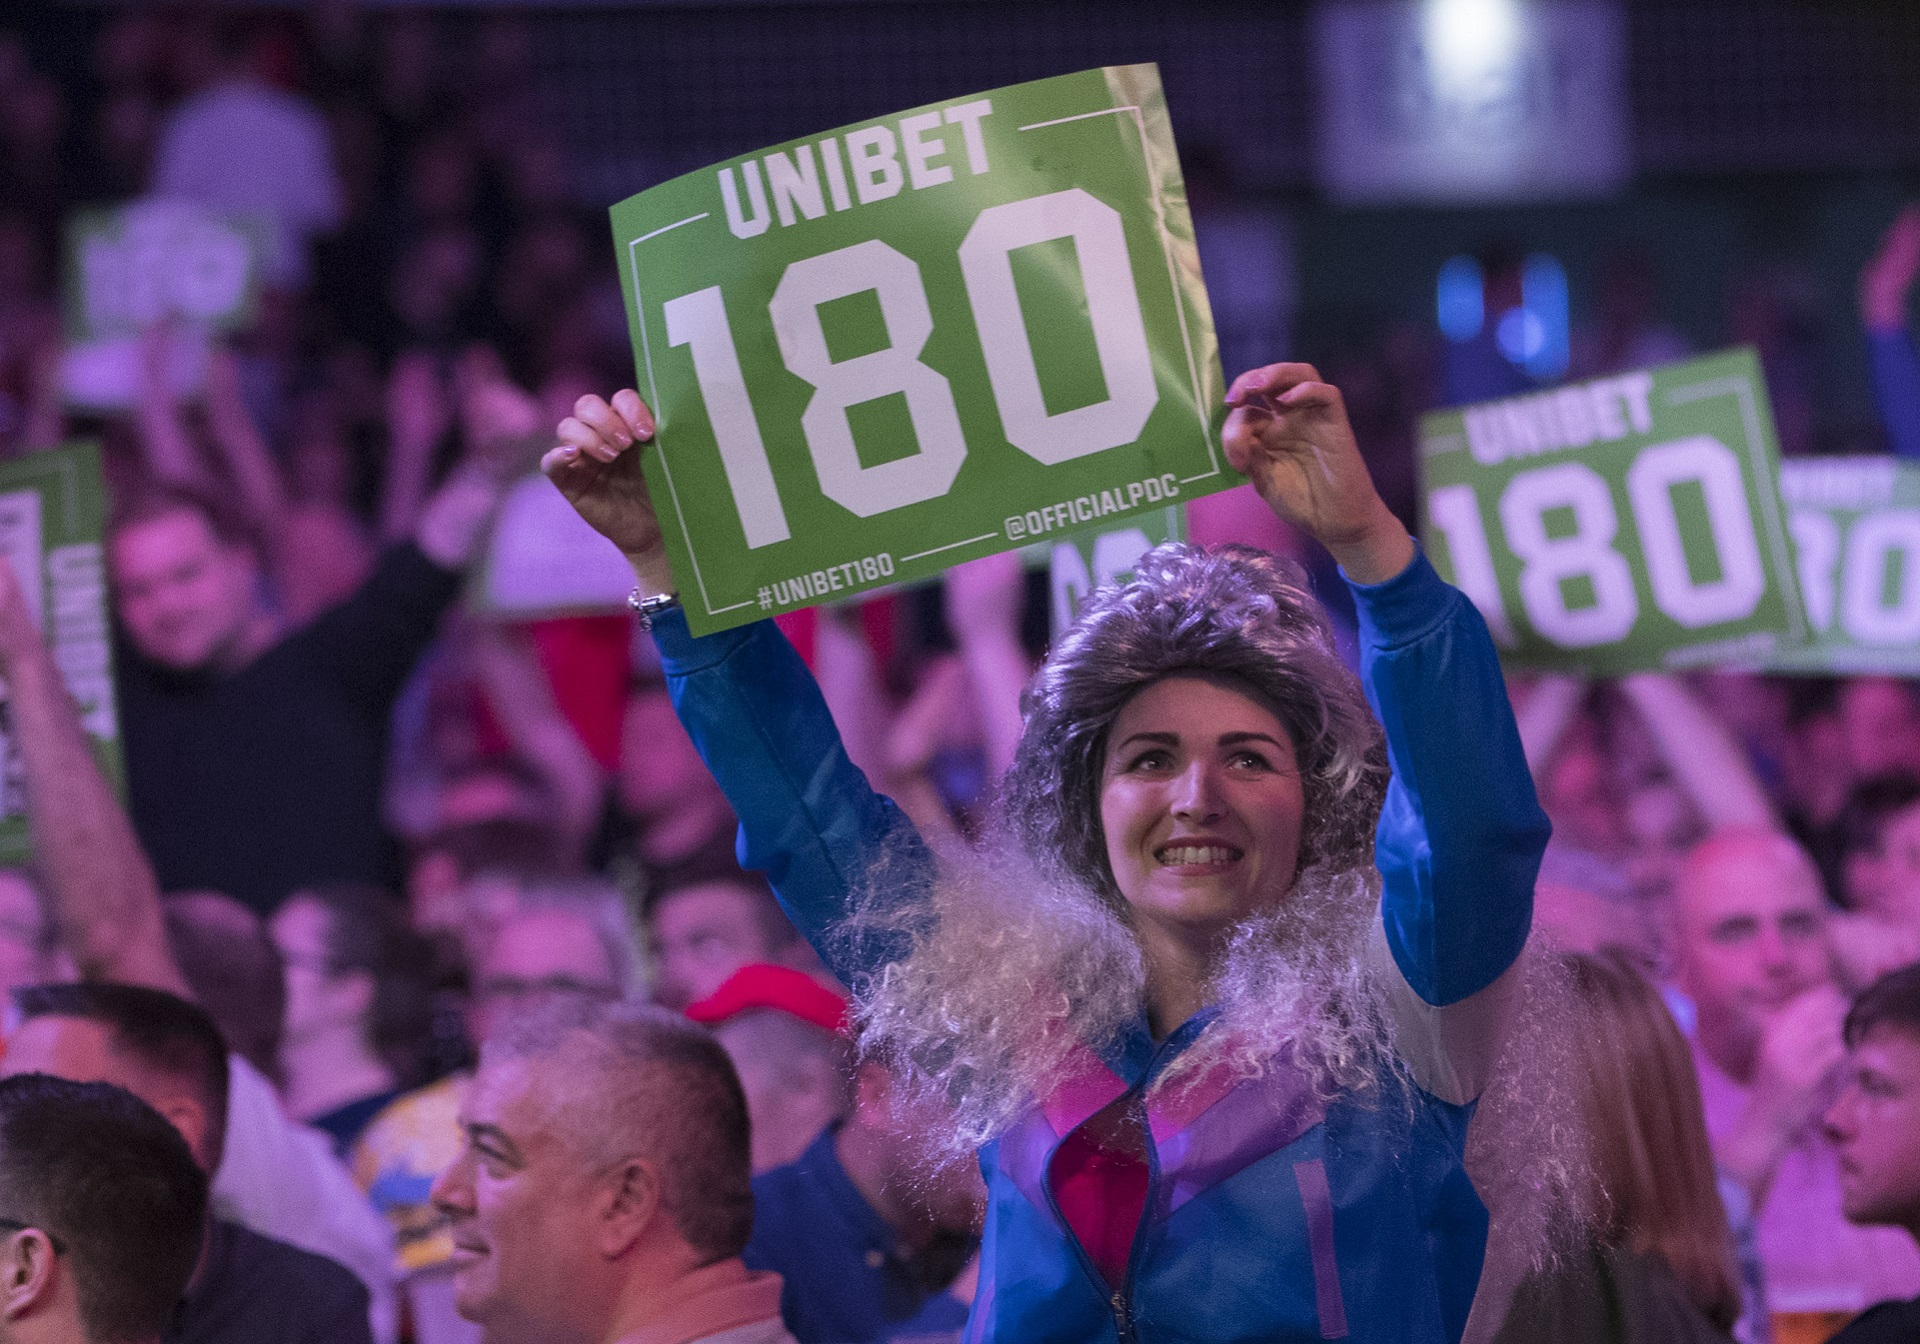 Fans at the Motorpoint Arena (Lawrence Lustig, PDC)